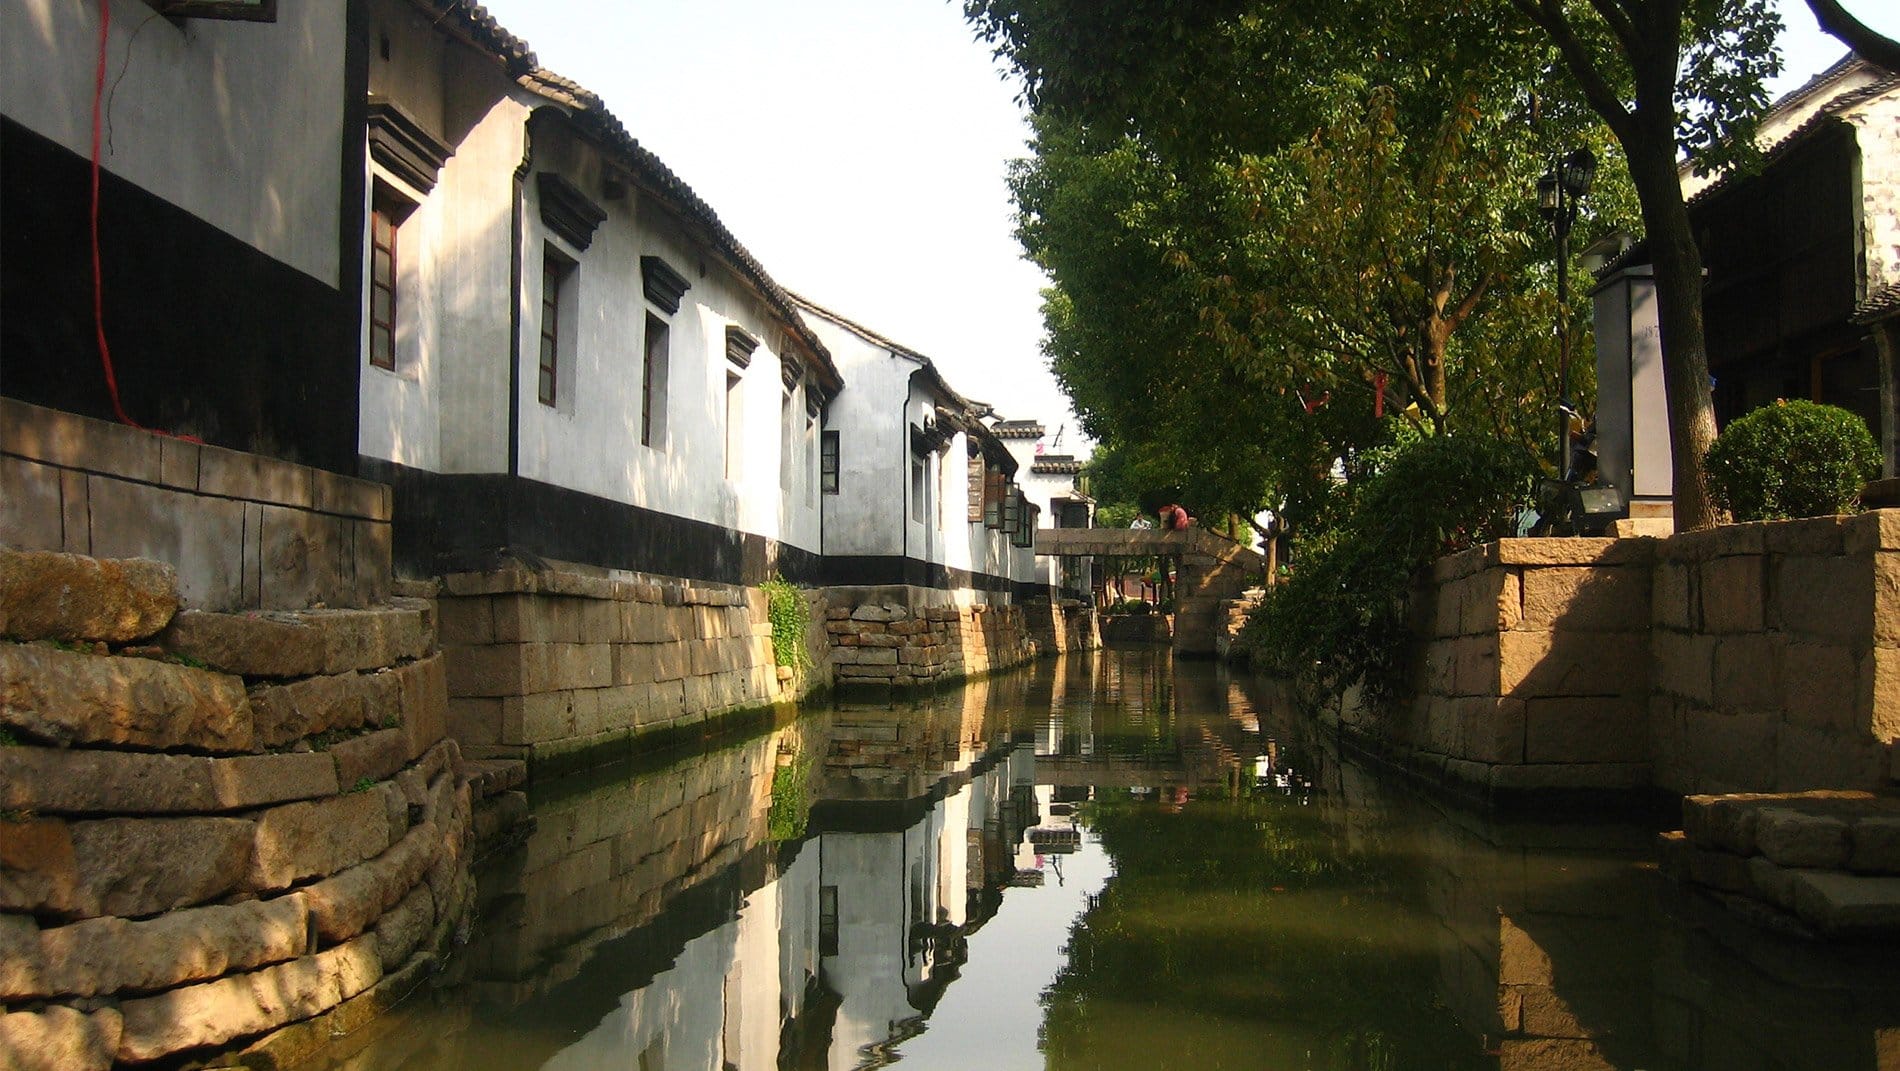 Canal Town~Suzhou is one of many traditional water towns in this prosperous delta of 